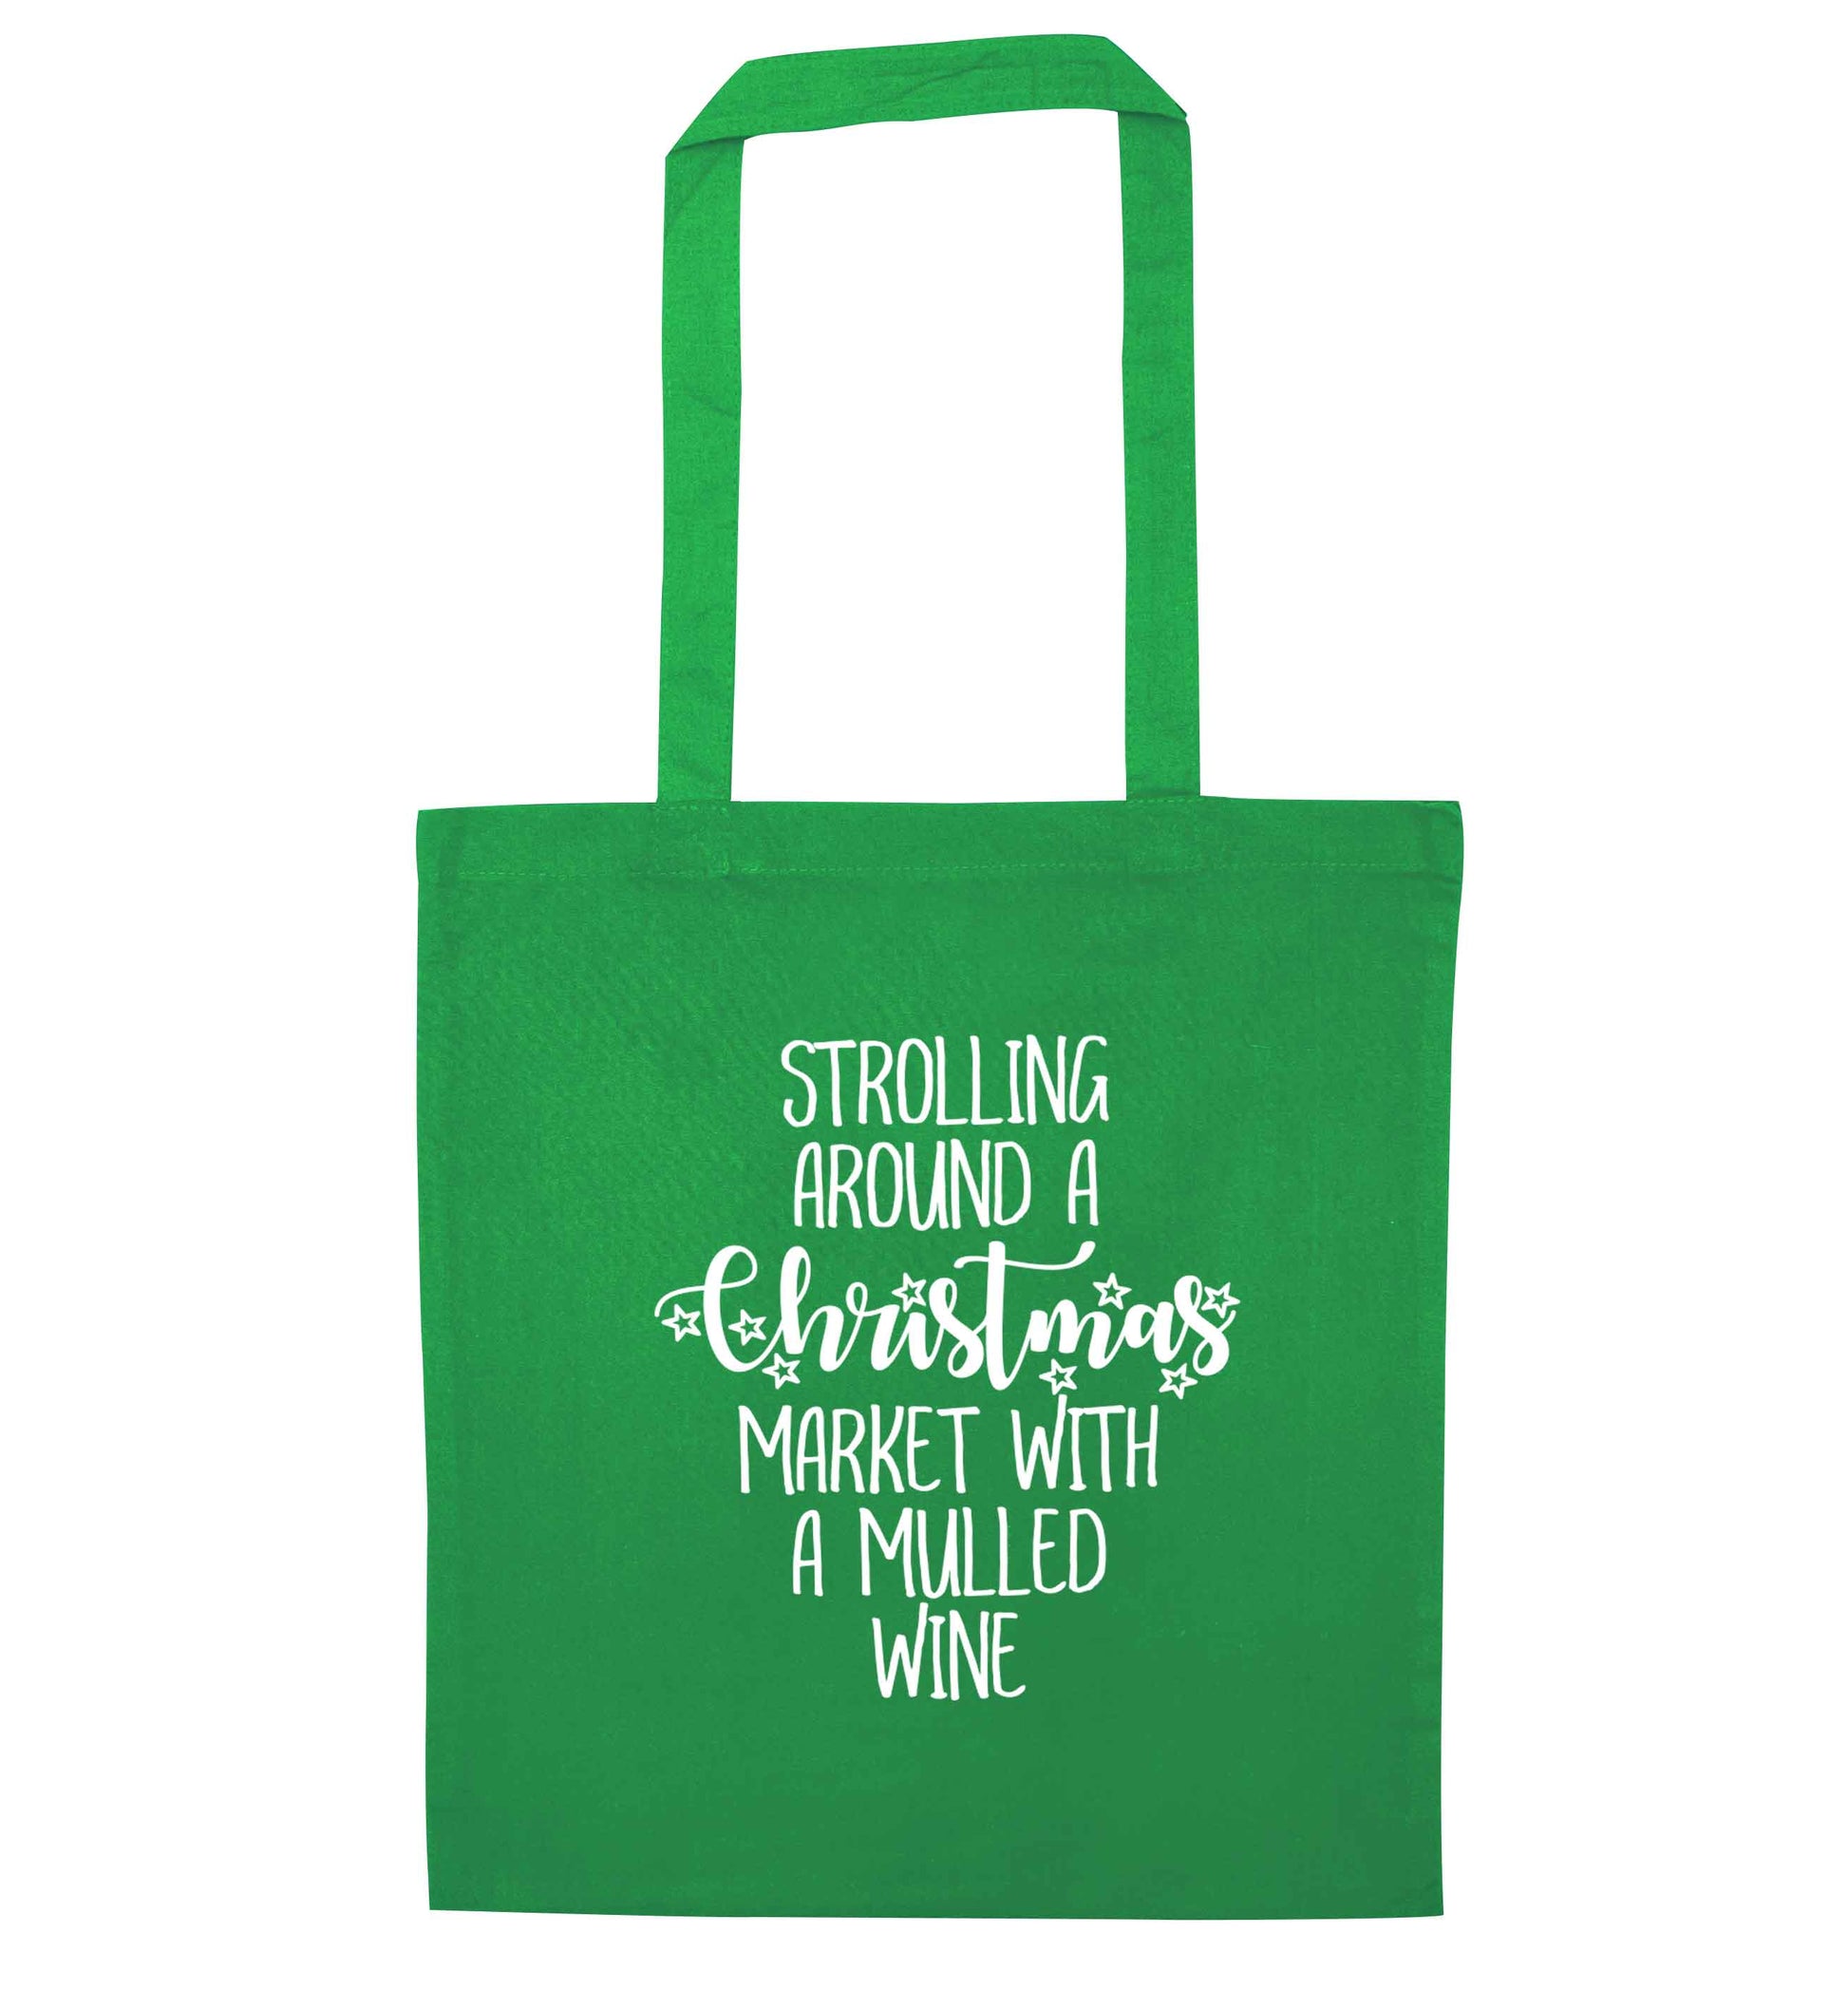 Strolling around a Christmas market with mulled wine green tote bag